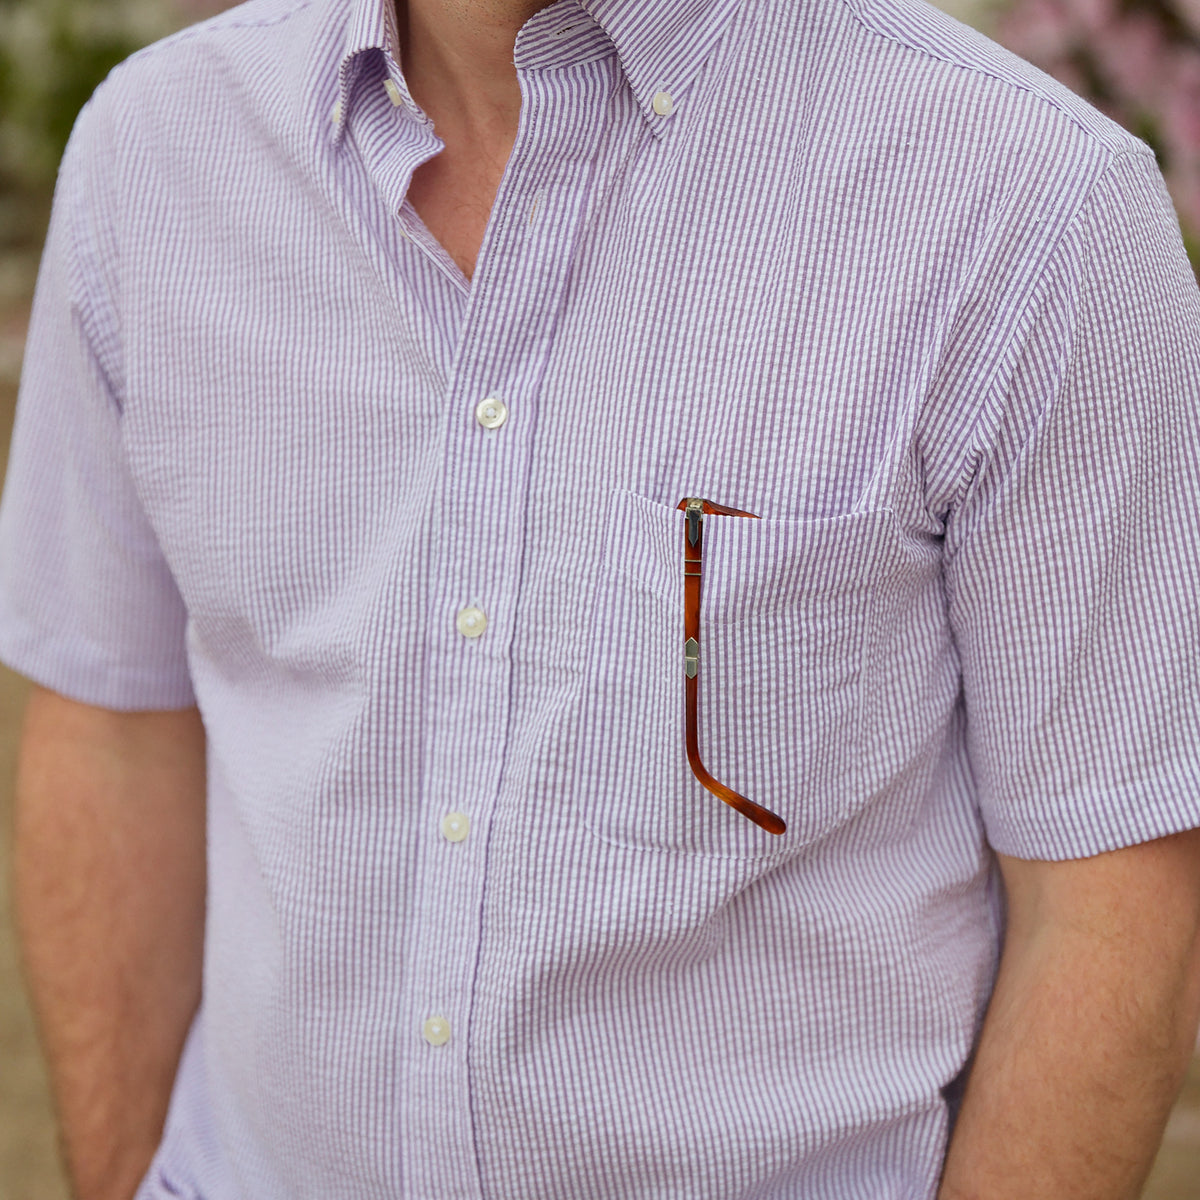 Seersucker all year long in a lavender purple seersucker shirt. Subtle, lightweight, and a texture they begs a second look.  100% Cotton Seersucker • Button Down Collar • Short Sleeve • Chest Pocket • Machine Washable • Made in Italy 